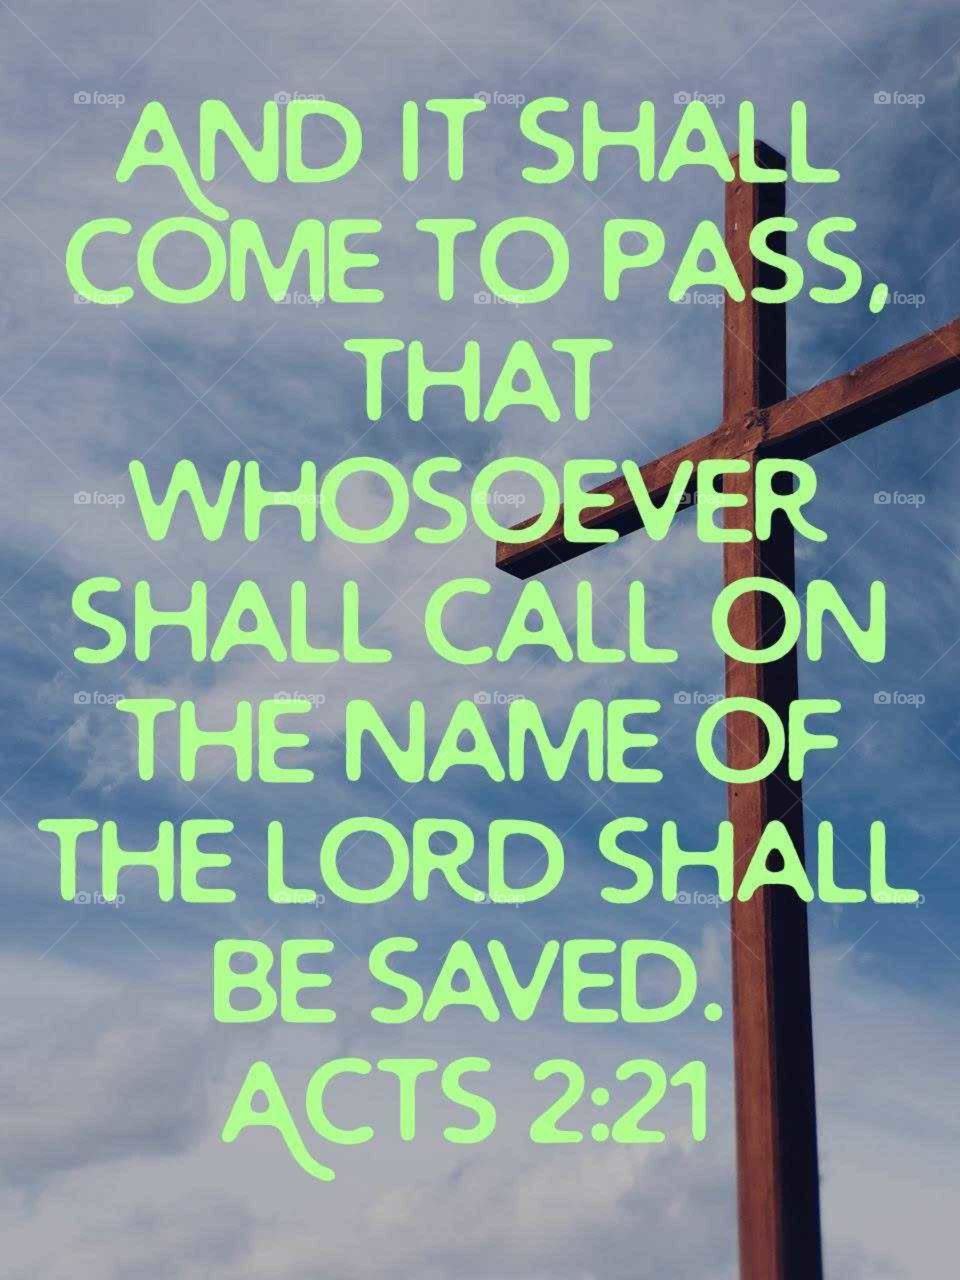 The only Name that gives salvation